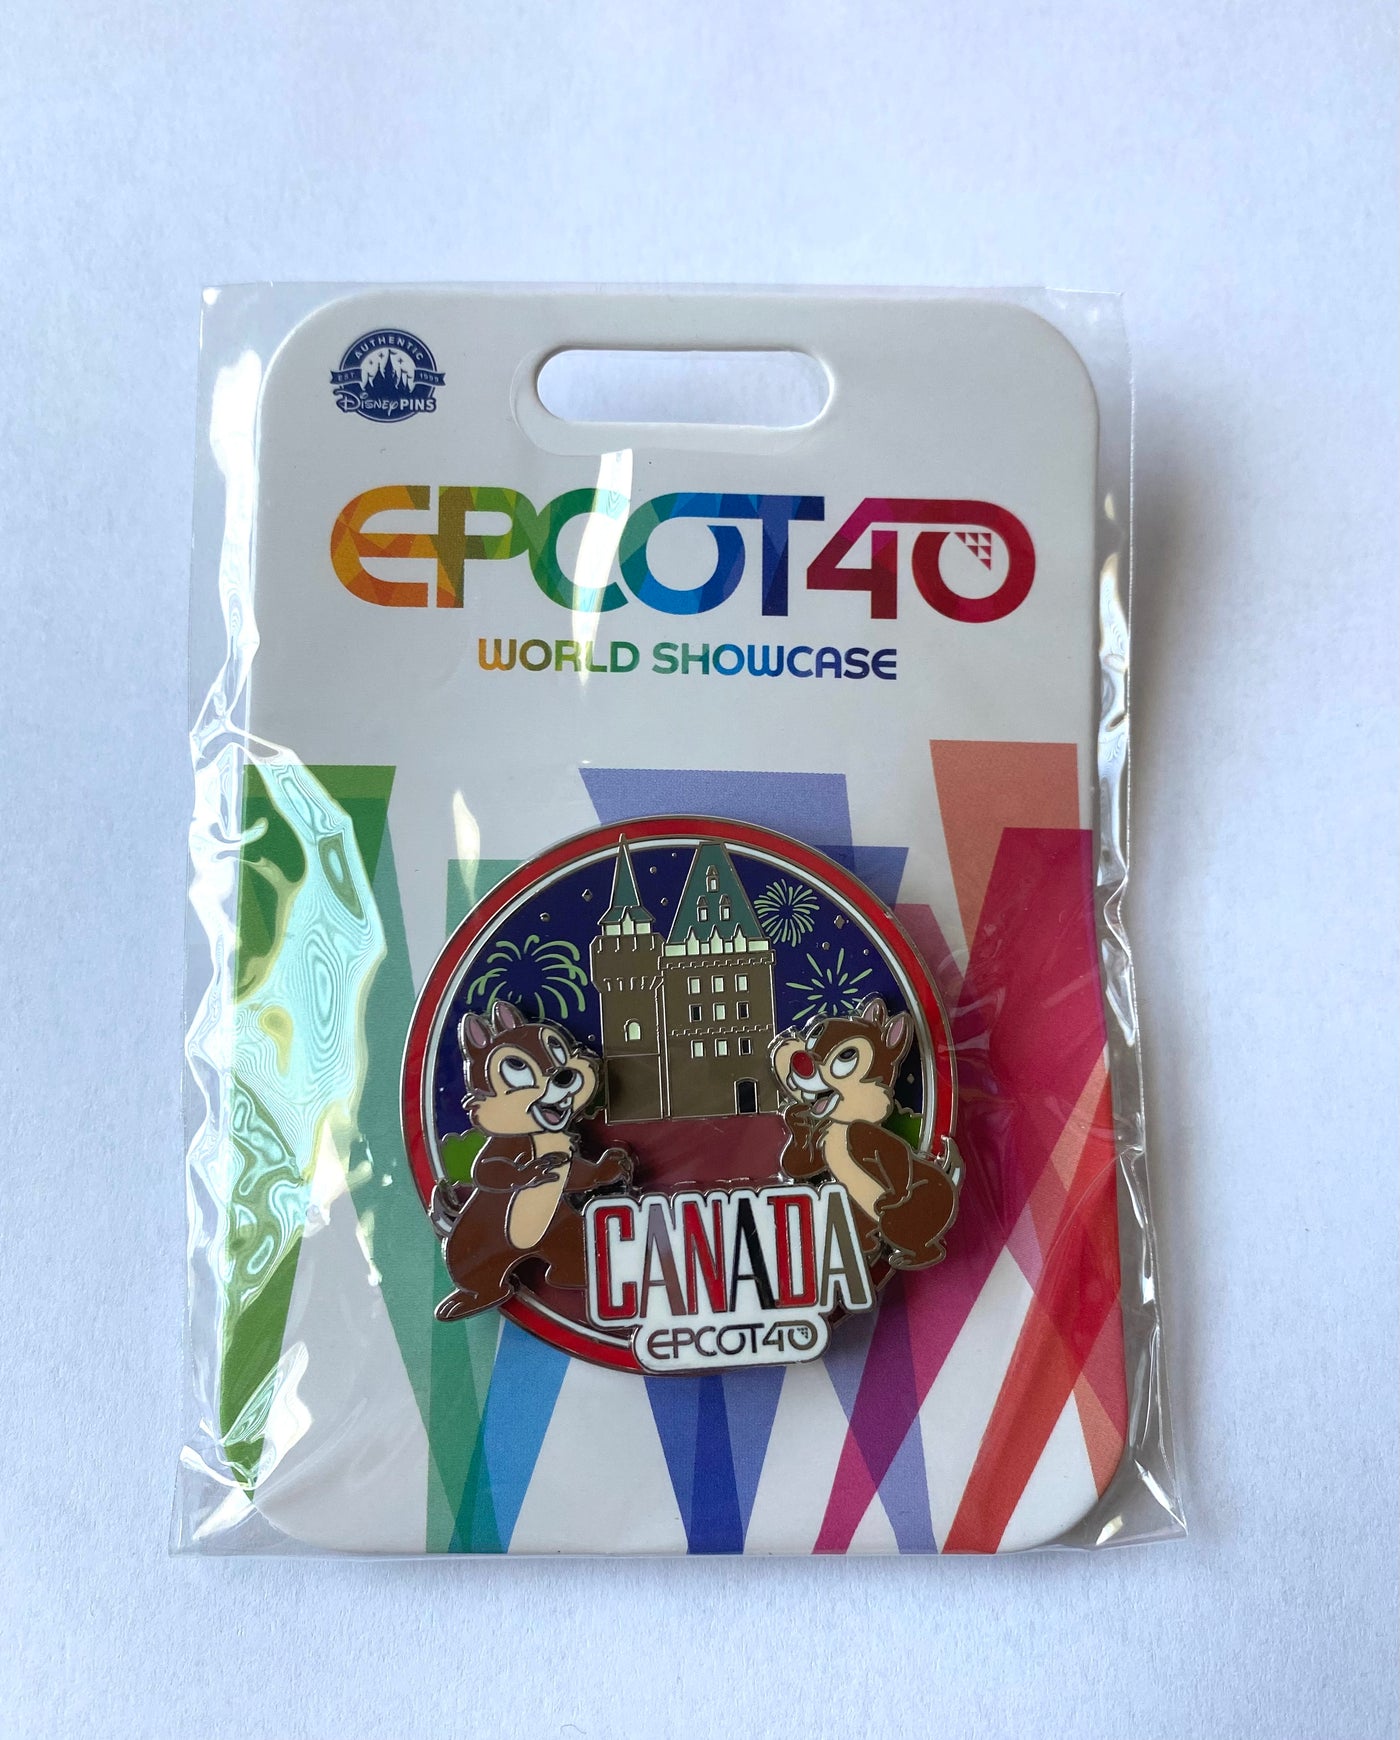 Disney Parks Epcot 40th World Showcase Canada Chip 'n Dale Pin New with Card